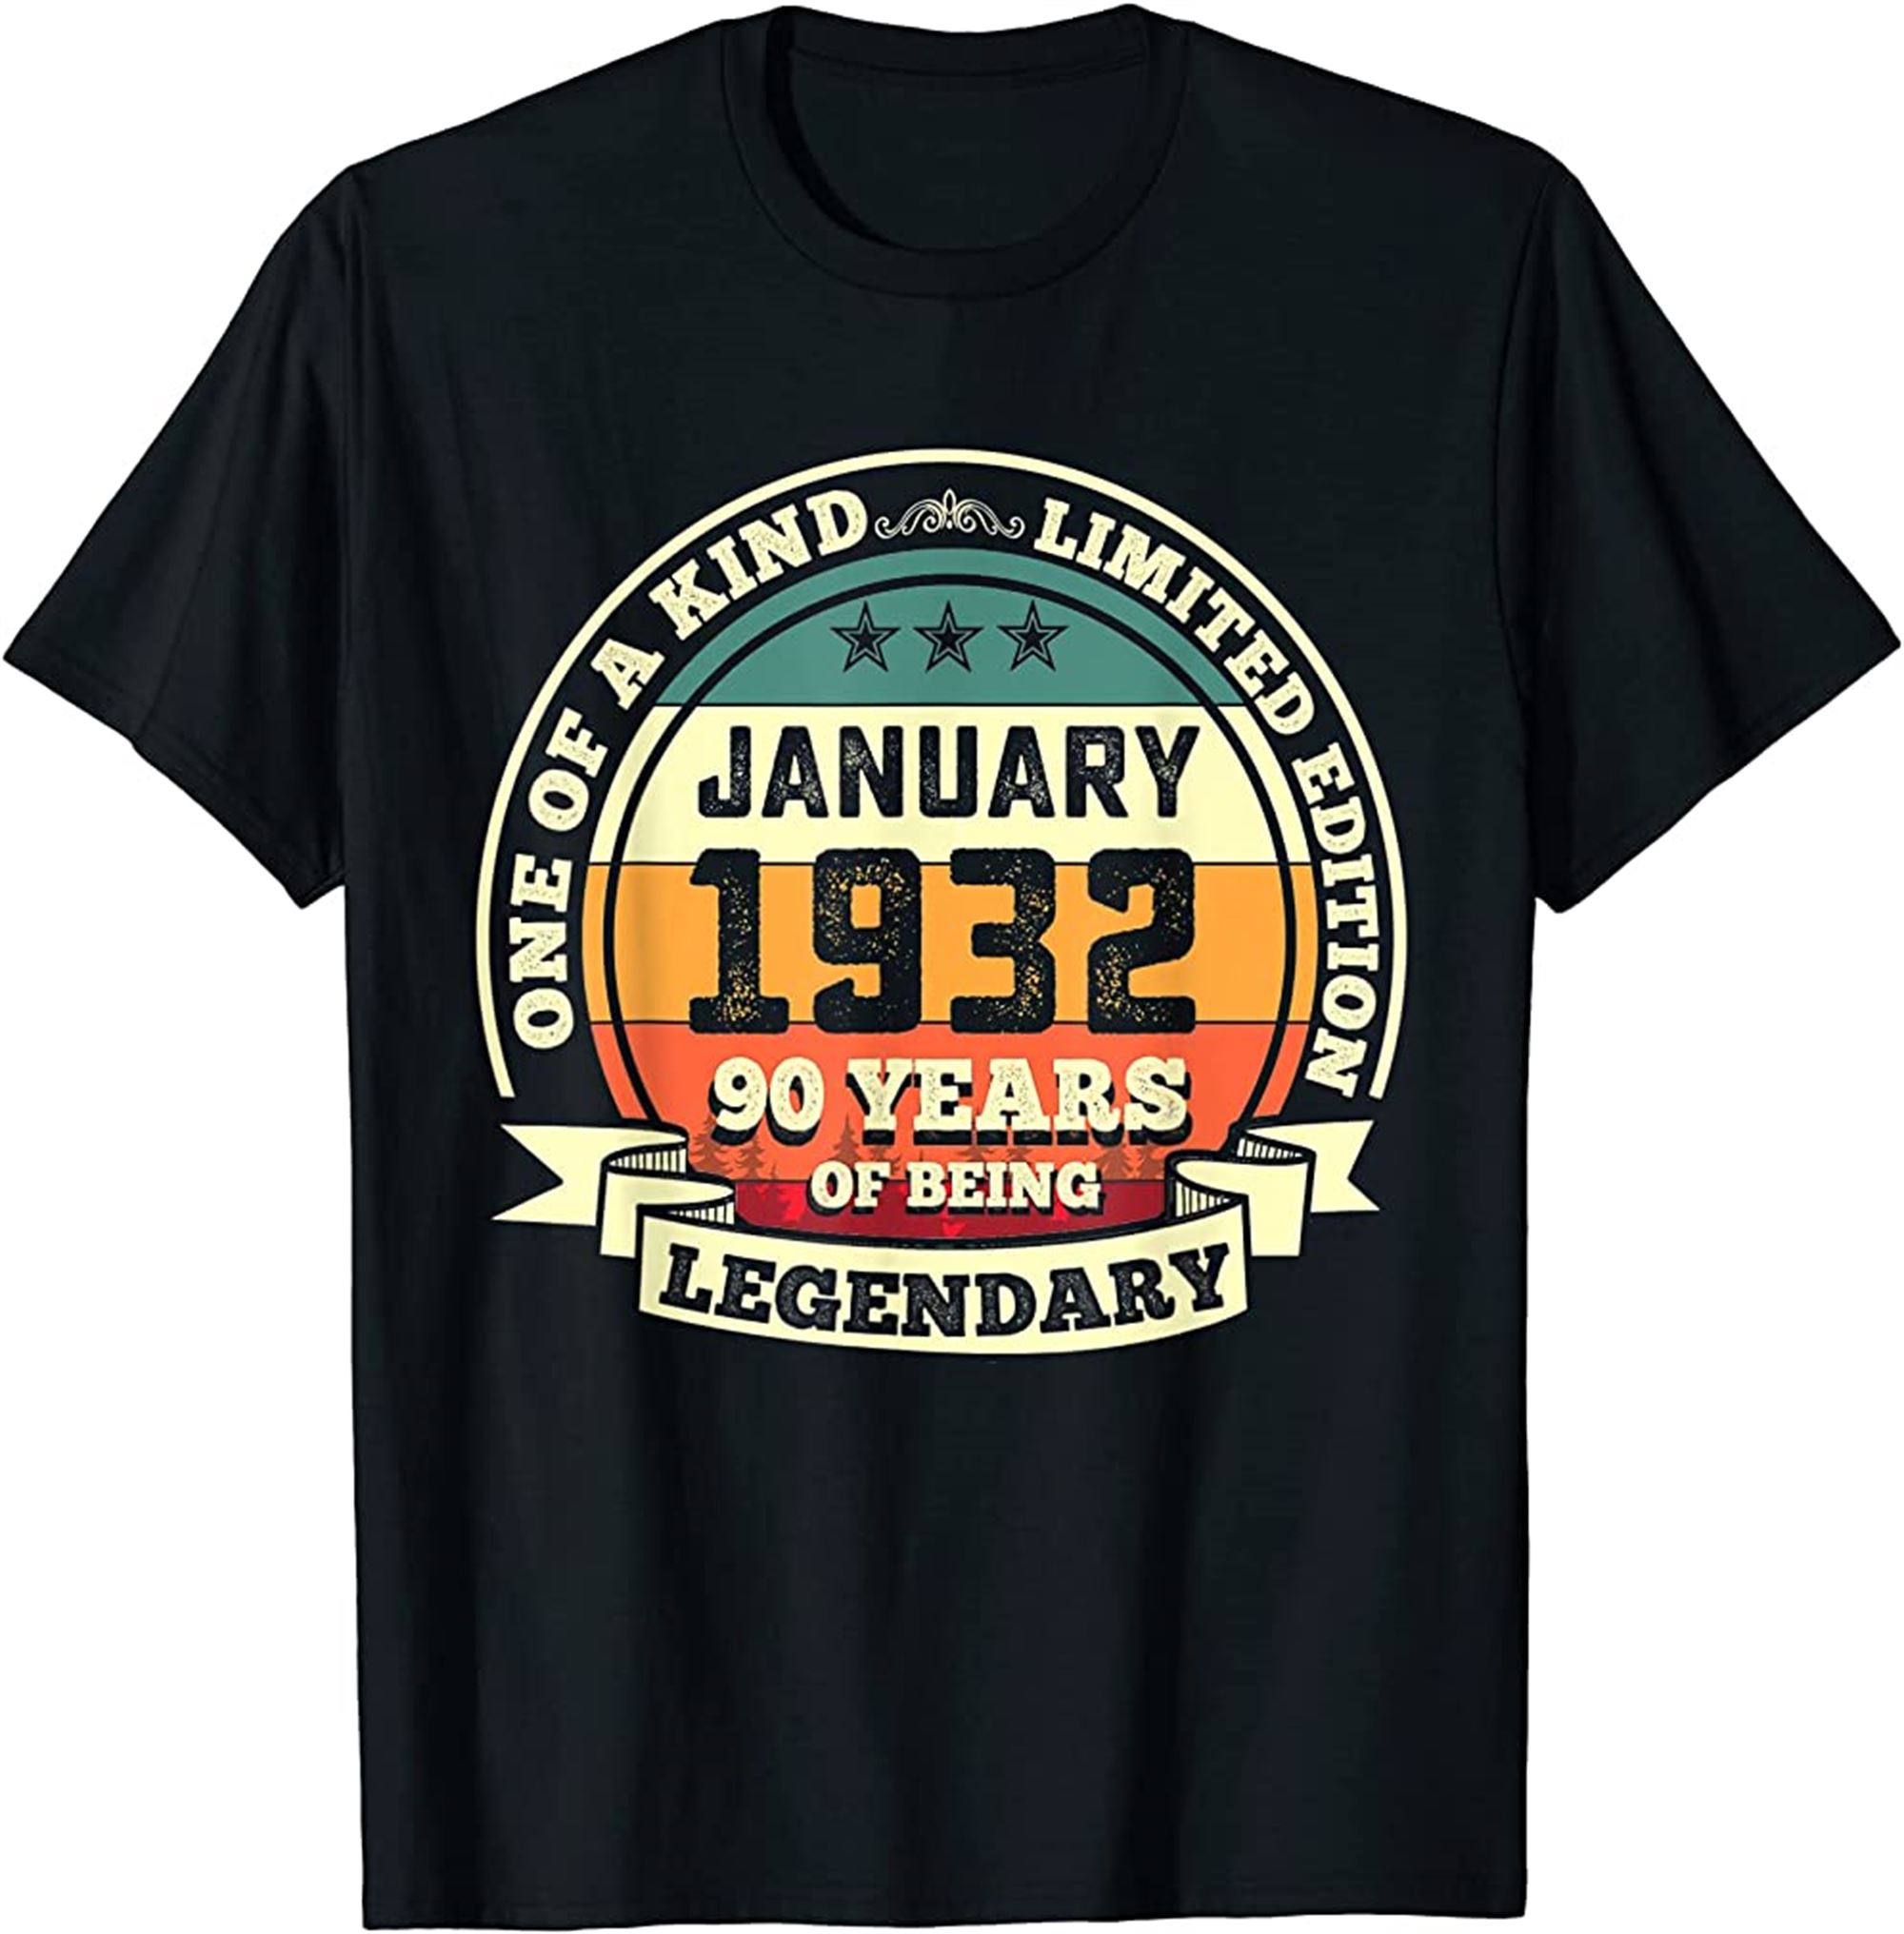 January 1932 90th Birthday Gift 90 Years Of Being Legendary T-shirt Size Up To 5xl